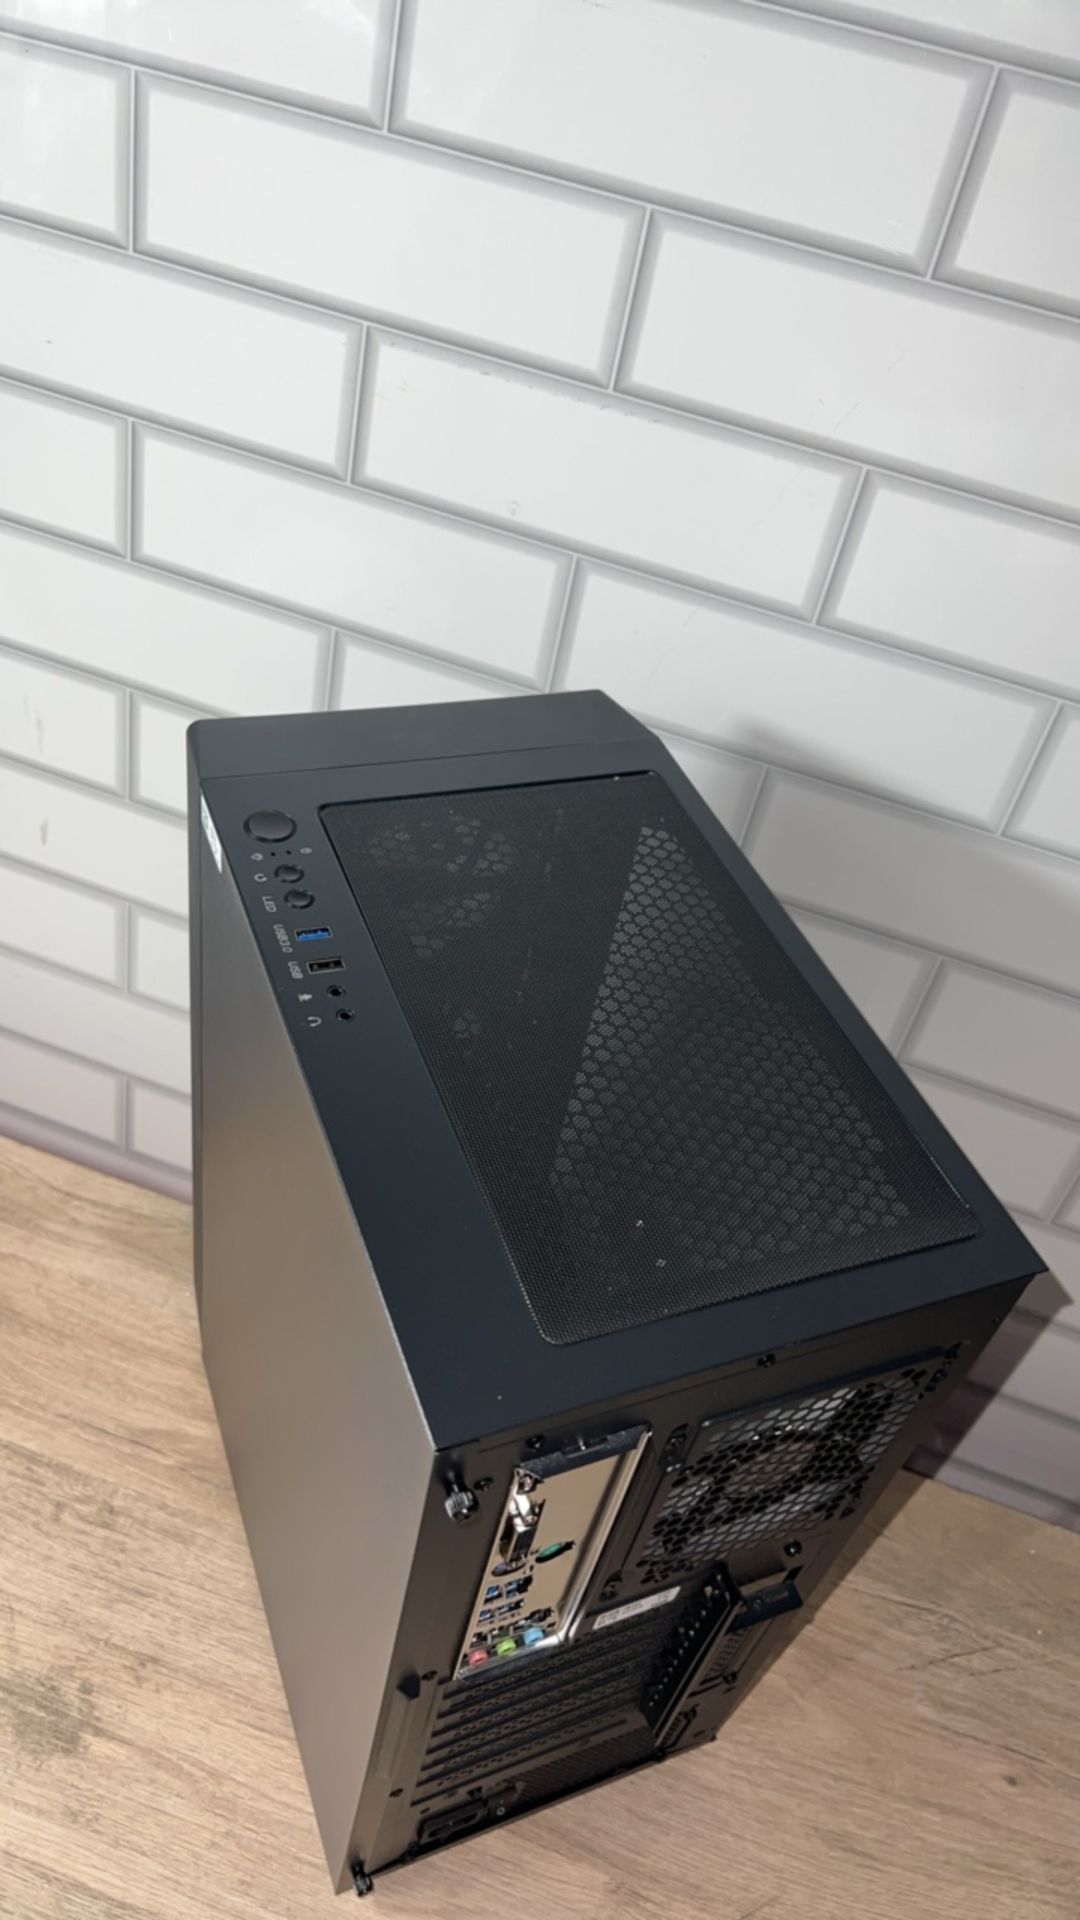 Cyberpower Eurus PC Tower - Image 6 of 8